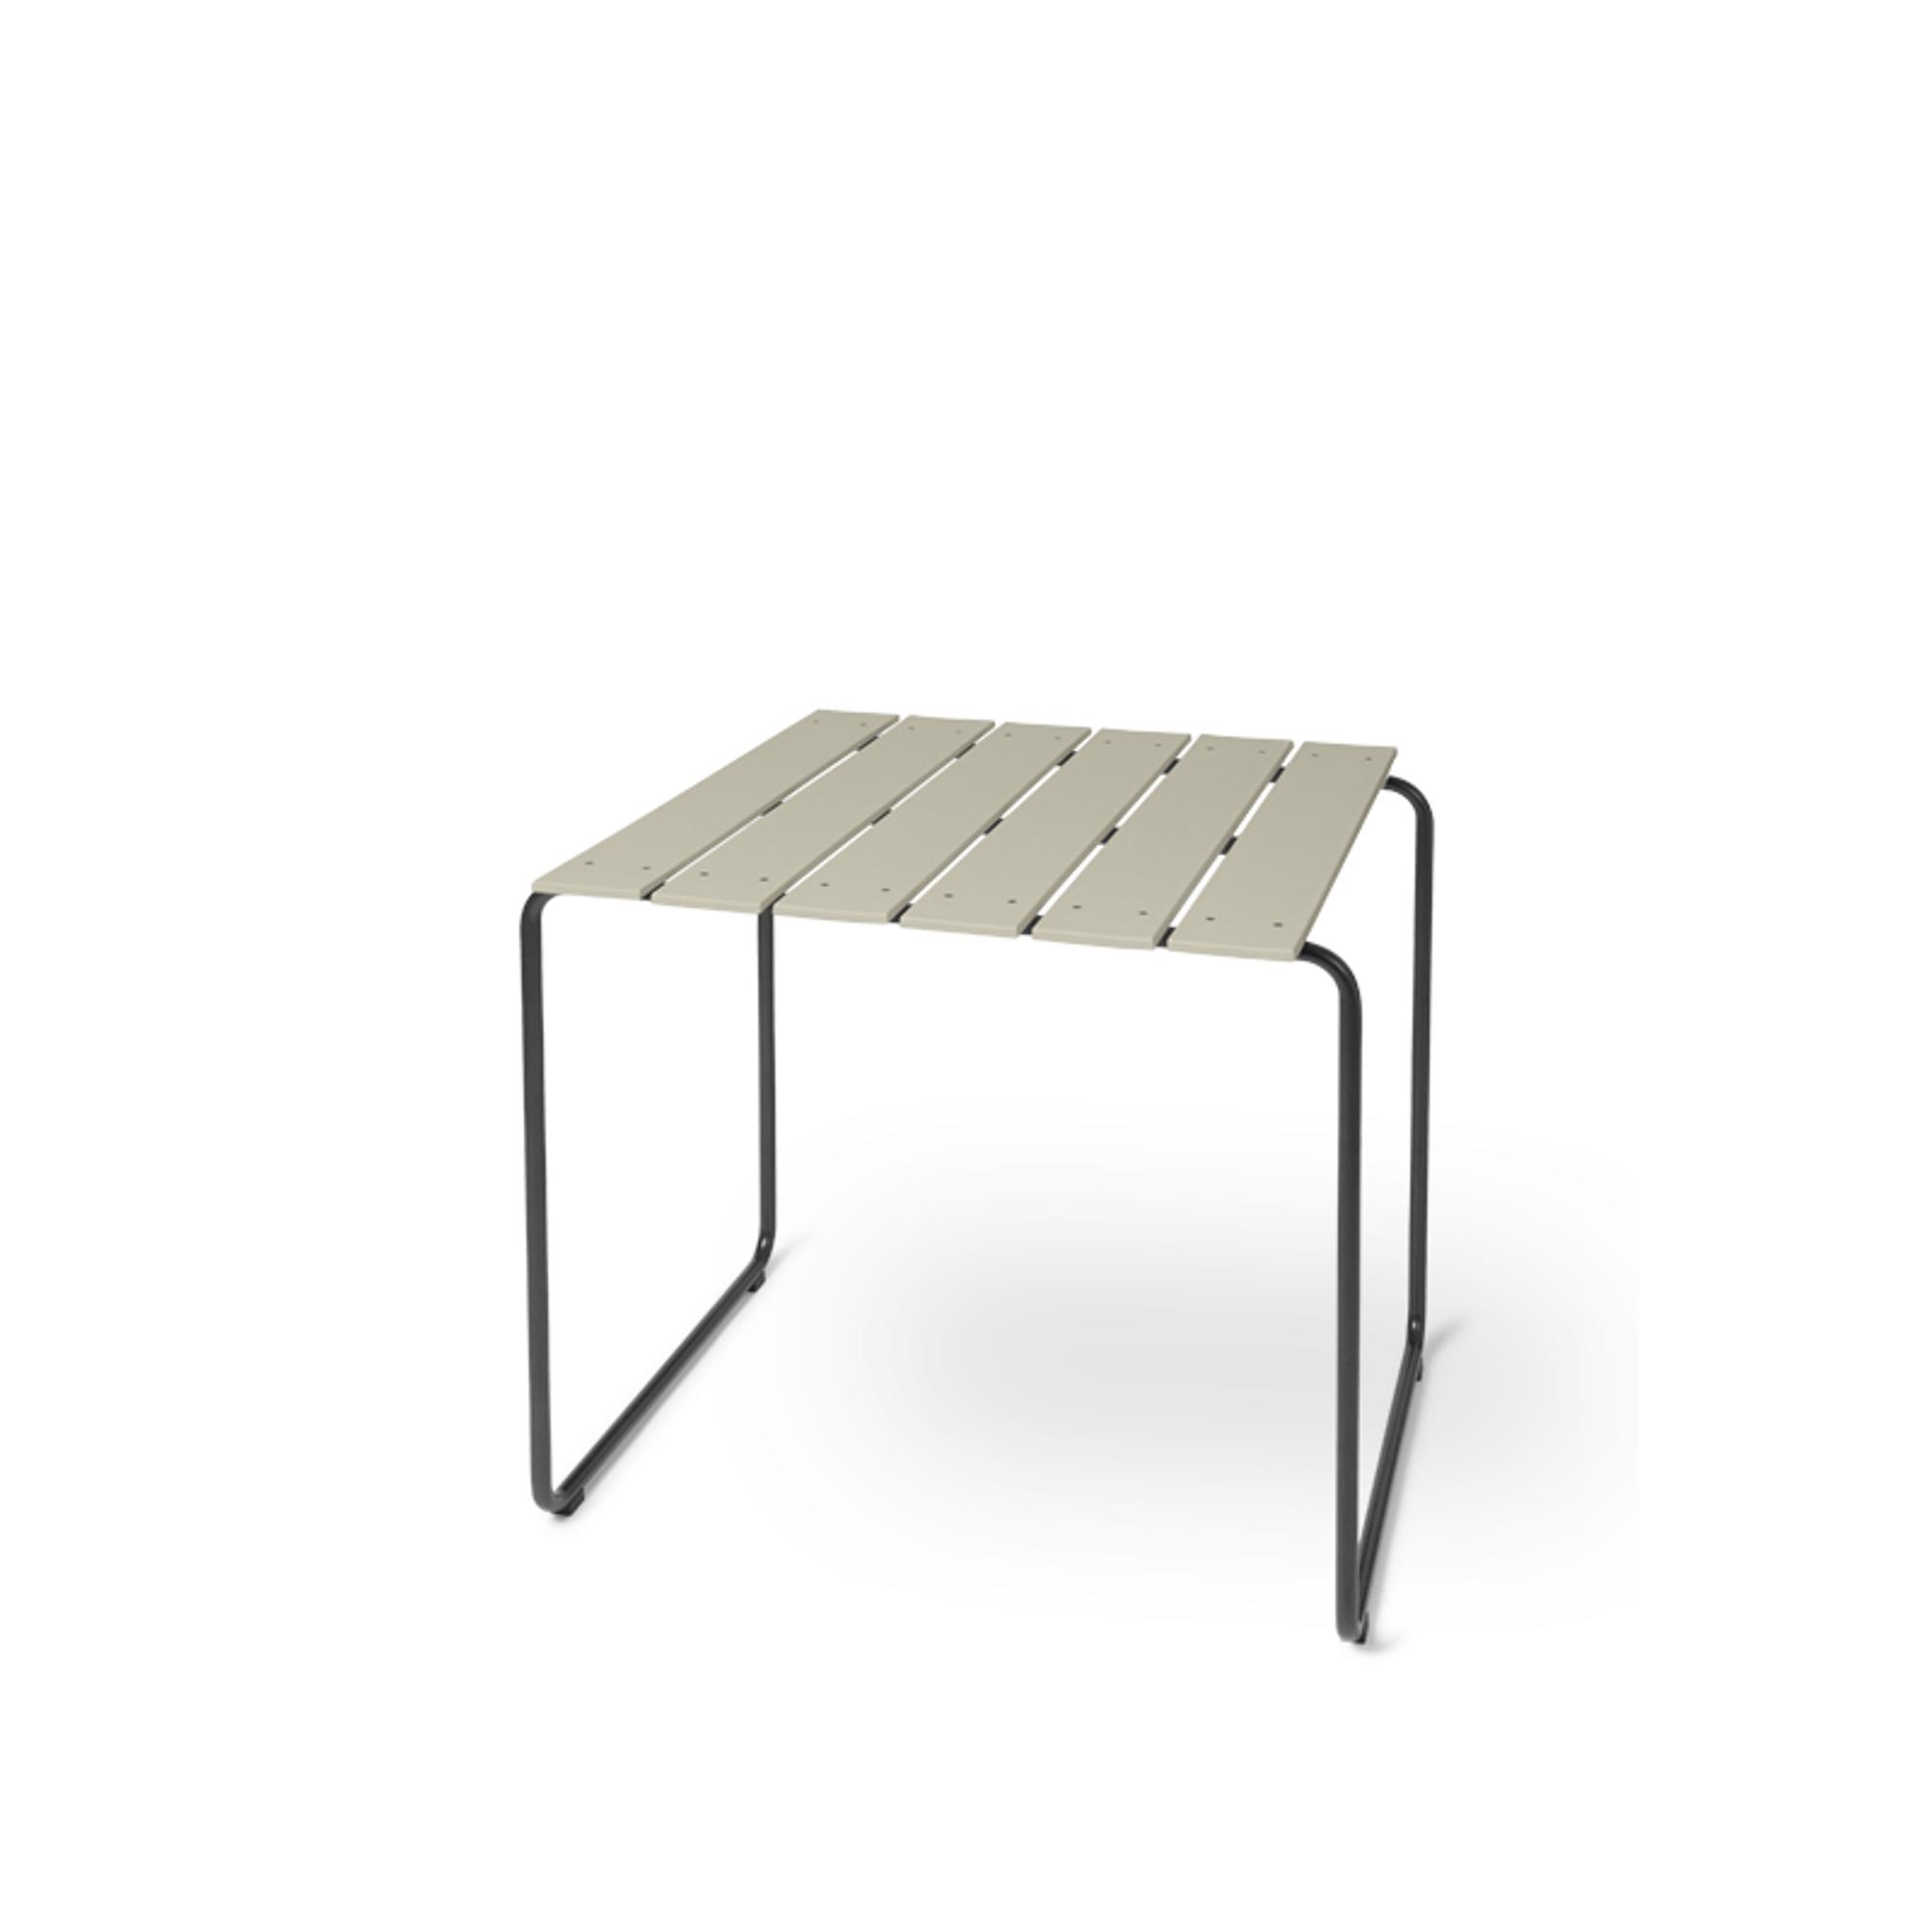 Mater Ocean Table 2-pers Sand 70x70cm 